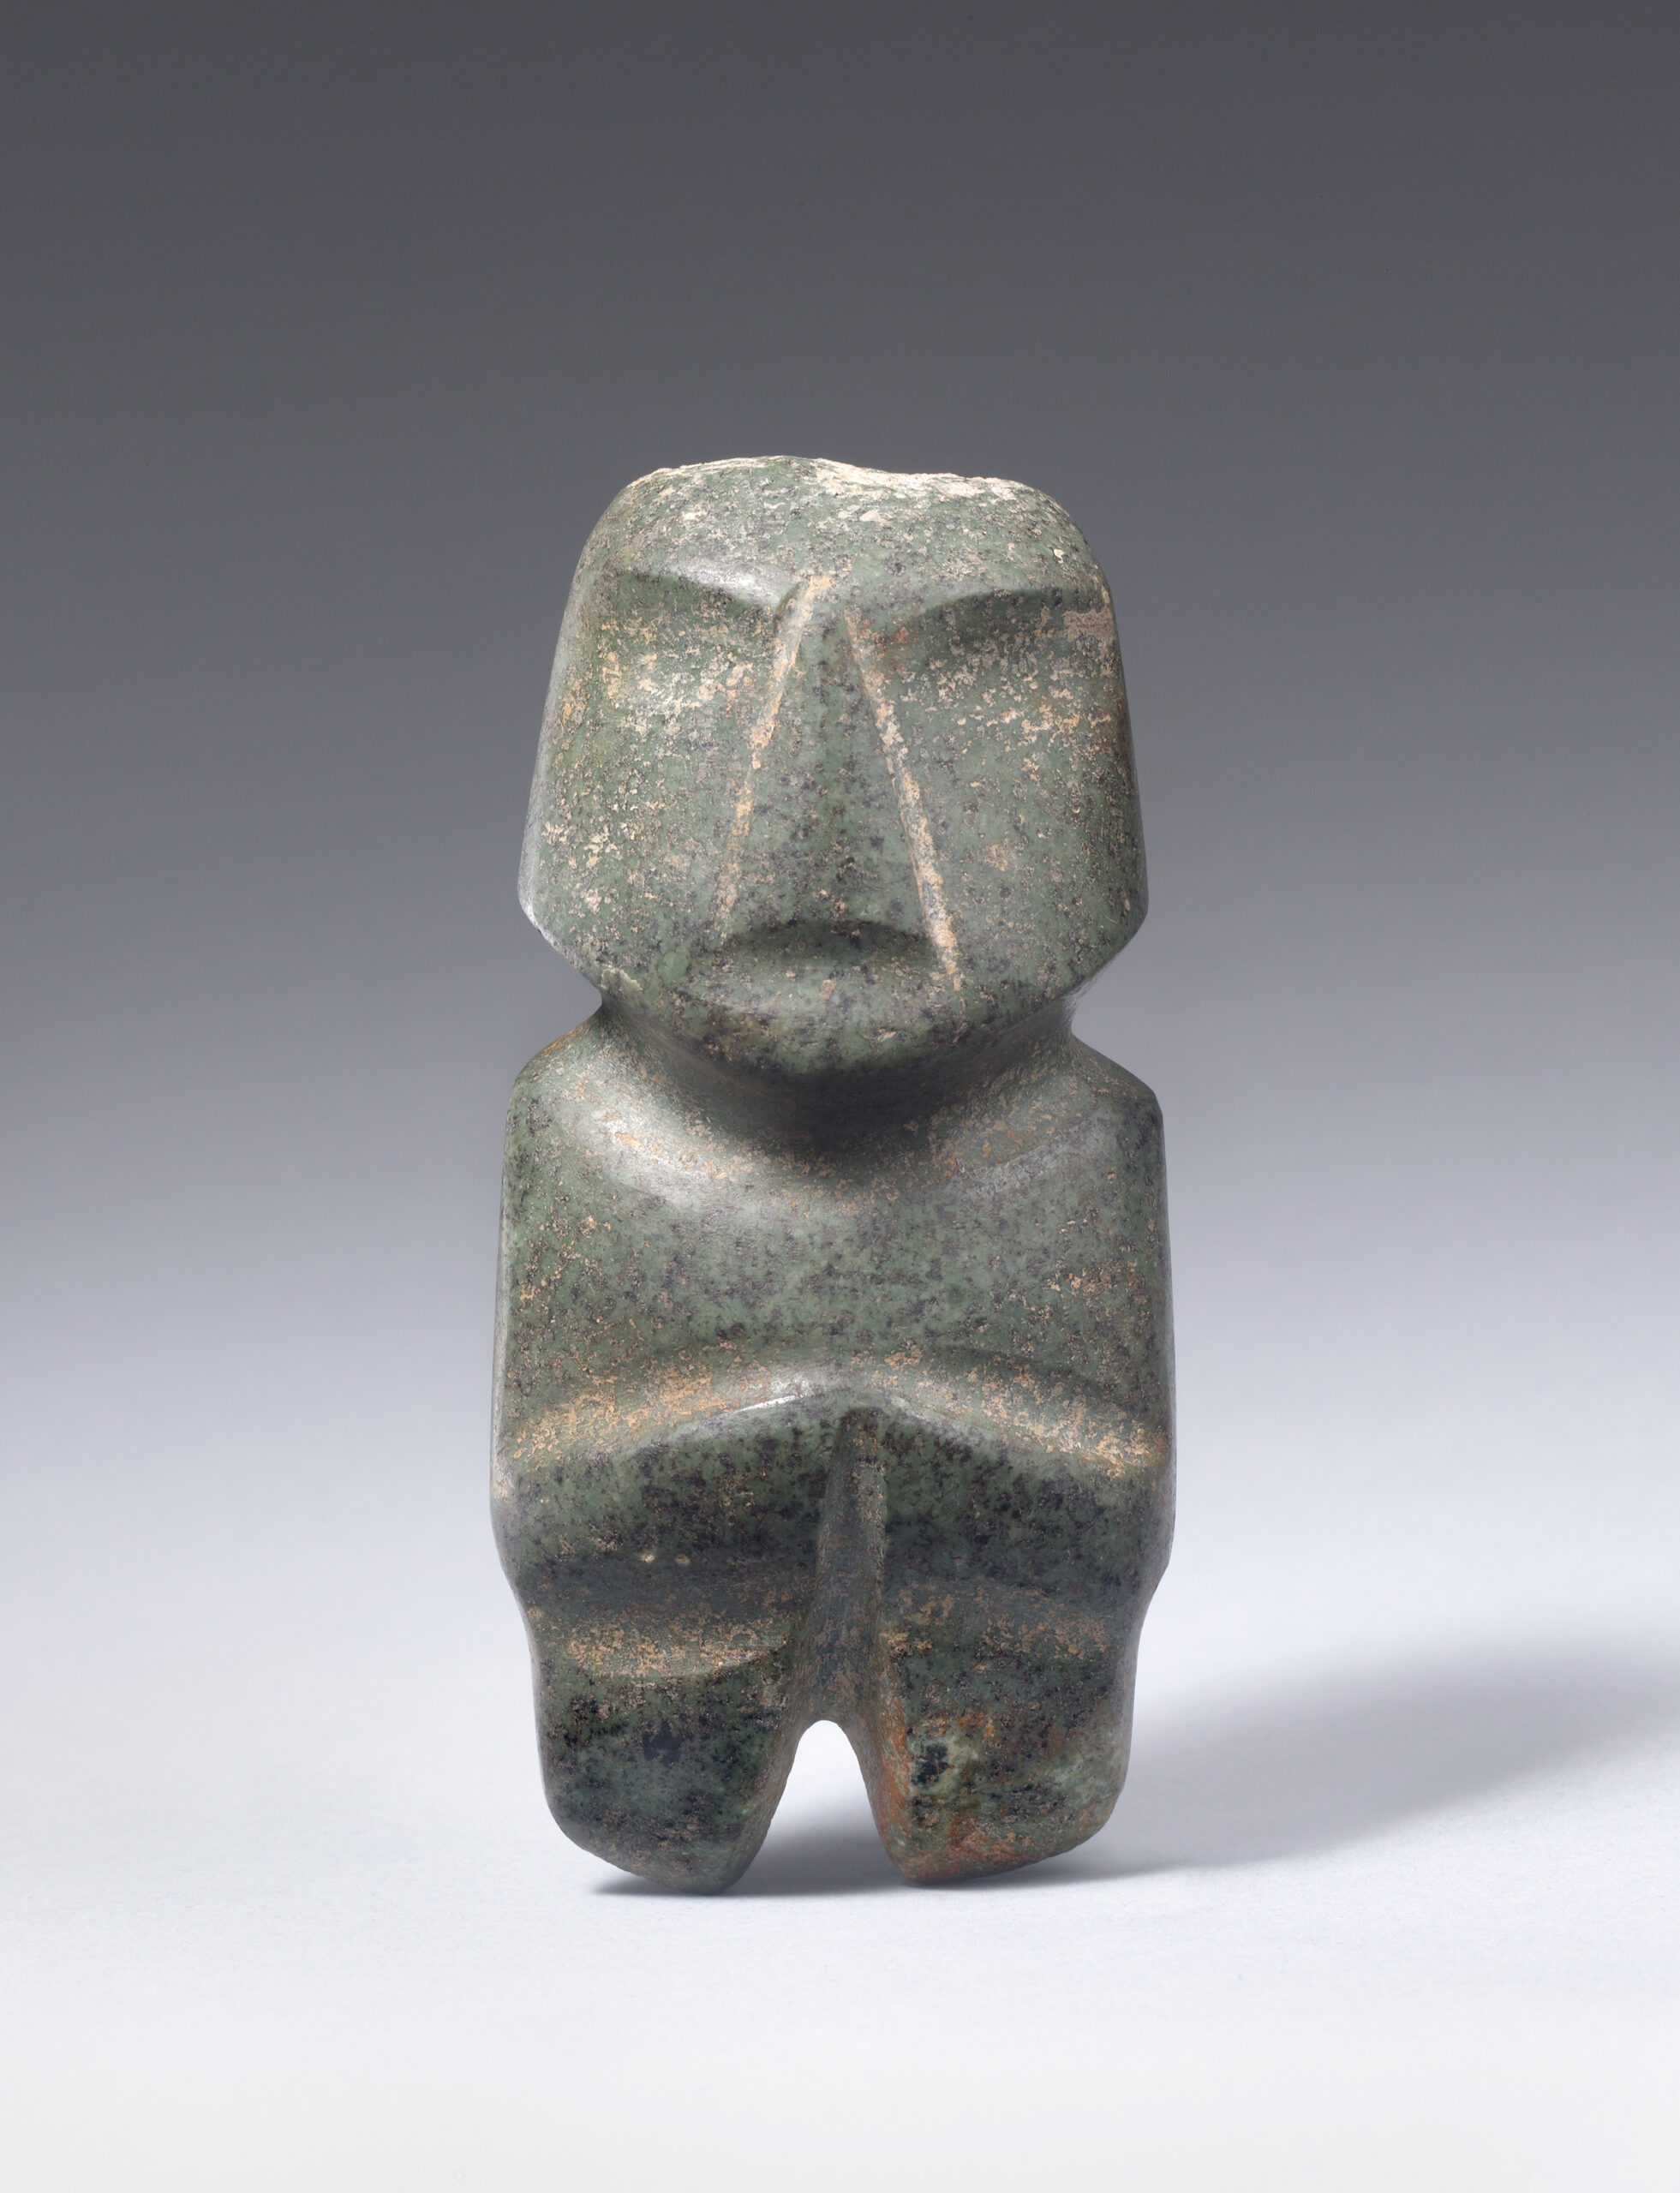 Stone sculpture of an abstracted standing figure with carved facial features and arms at the torso.